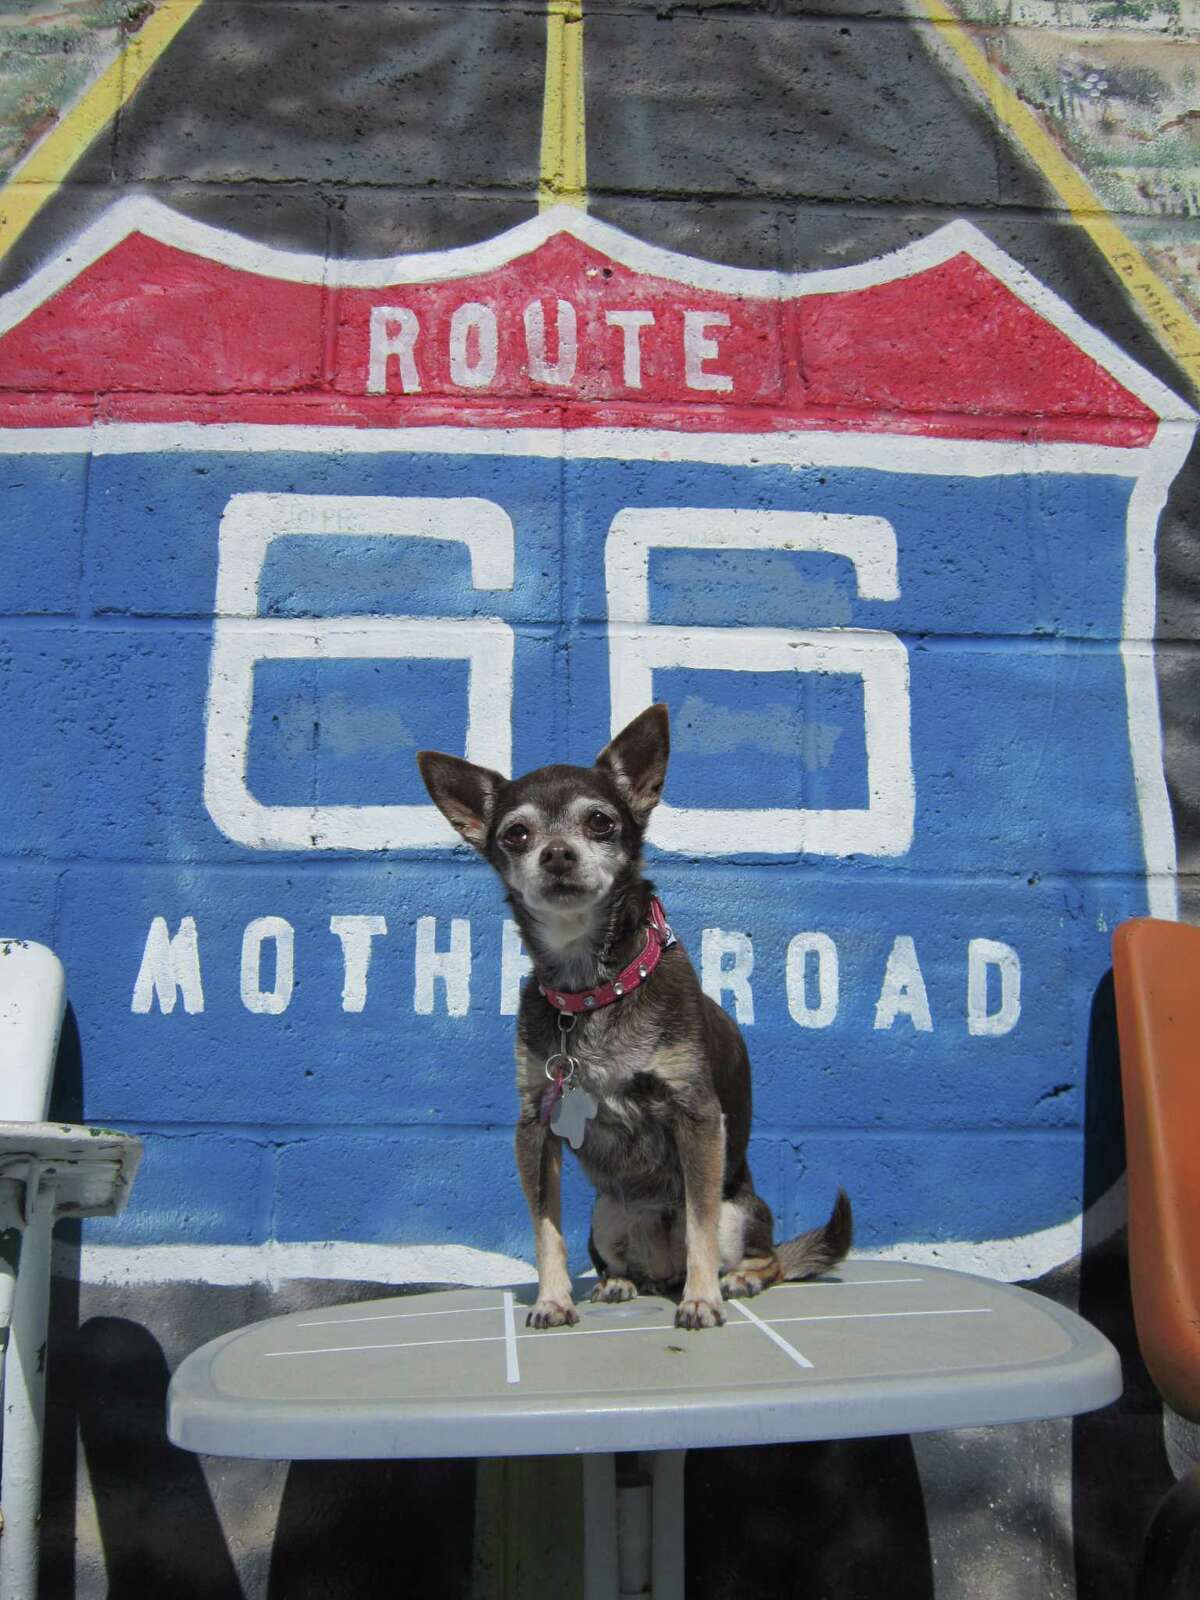 Sasha, Michelle Newman's 17-year-old Chihuahua, takes a break in Oklahoma on Route 66.